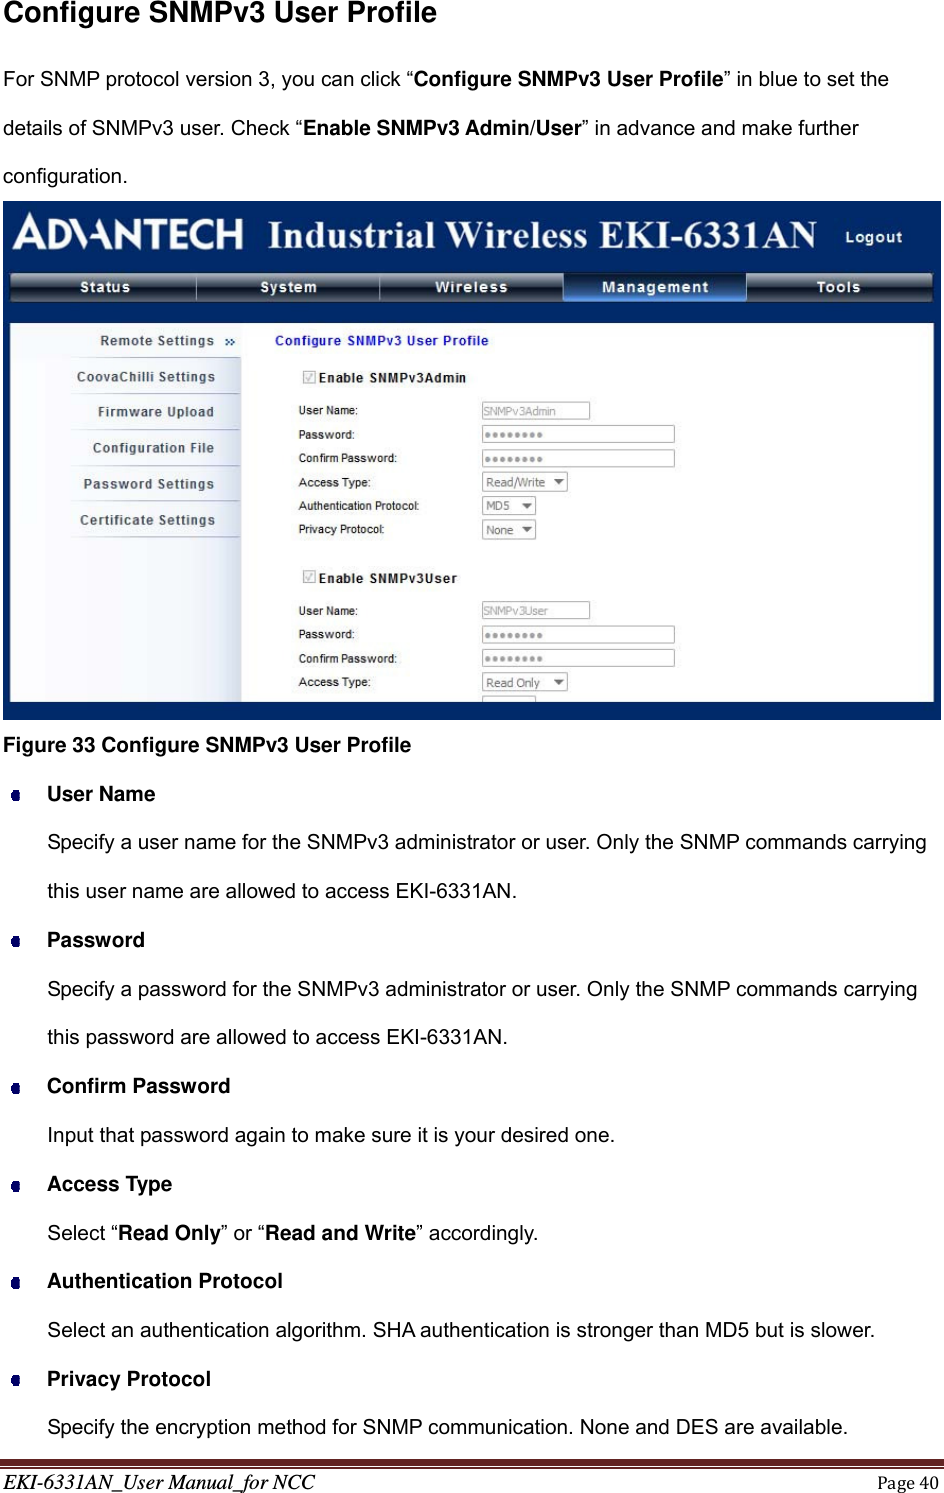 EKI-6331AN_User Manual_for NCCPage40Configure SNMPv3 User Profile For SNMP protocol version 3, you can click “Configure SNMPv3 User Profile” in blue to set the details of SNMPv3 user. Check “Enable SNMPv3 Admin/User” in advance and make further configuration.  Figure 33 Configure SNMPv3 User Profile  User Name Specify a user name for the SNMPv3 administrator or user. Only the SNMP commands carrying this user name are allowed to access EKI-6331AN.  Password Specify a password for the SNMPv3 administrator or user. Only the SNMP commands carrying this password are allowed to access EKI-6331AN.  Confirm Password Input that password again to make sure it is your desired one.  Access Type Select “Read Only” or “Read and Write” accordingly.  Authentication Protocol Select an authentication algorithm. SHA authentication is stronger than MD5 but is slower.  Privacy Protocol Specify the encryption method for SNMP communication. None and DES are available. 